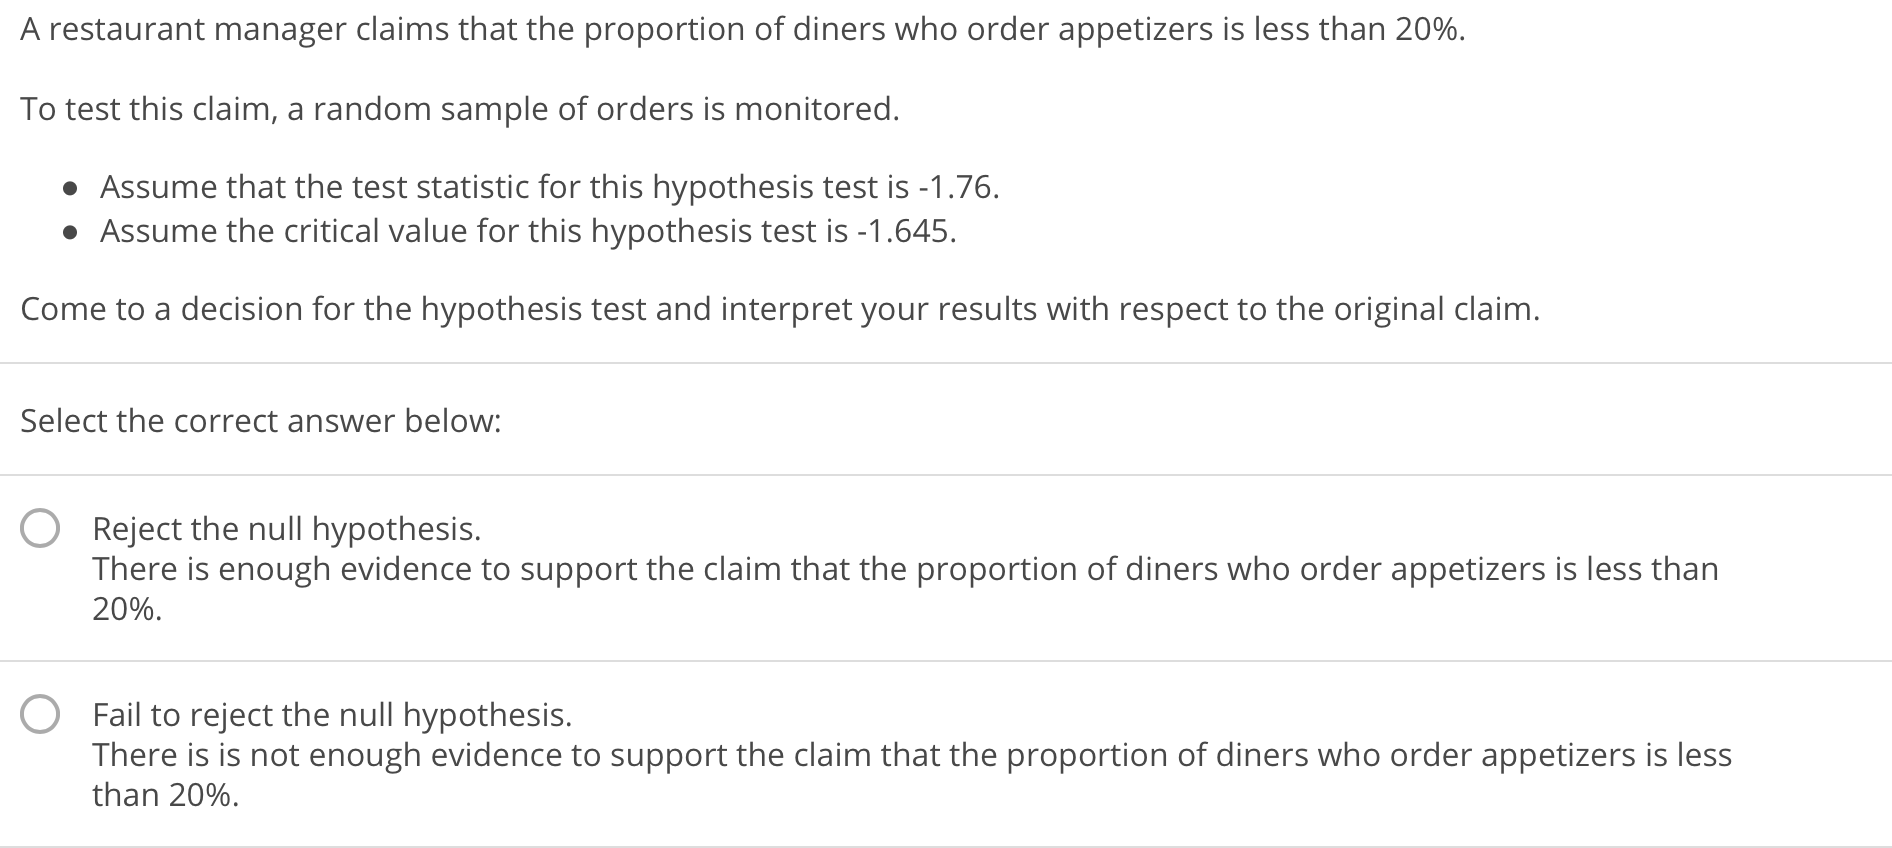 A restaurant manager claims that the proportion of diners who order appetizers is less than 20%.
To test this claim, a random sample of orders is monitored
Assume that the test statistic for this hypothesis test is -1.76.
Assume the critical value for this hypothesis test is -1.645
Come to a decision for the hypothesis test and interpret your results with respect to the original claim
Select the correct answer below:
O Reject the null hypothesis.
There is enough evidence to support the claim that the proportion of diners who order appetizers is less than
20%.
O
Fail to reject the null hypothesis.
There is is not enough evidence to support the claim that the proportion of diners who order appetizers is less
than 20%.
